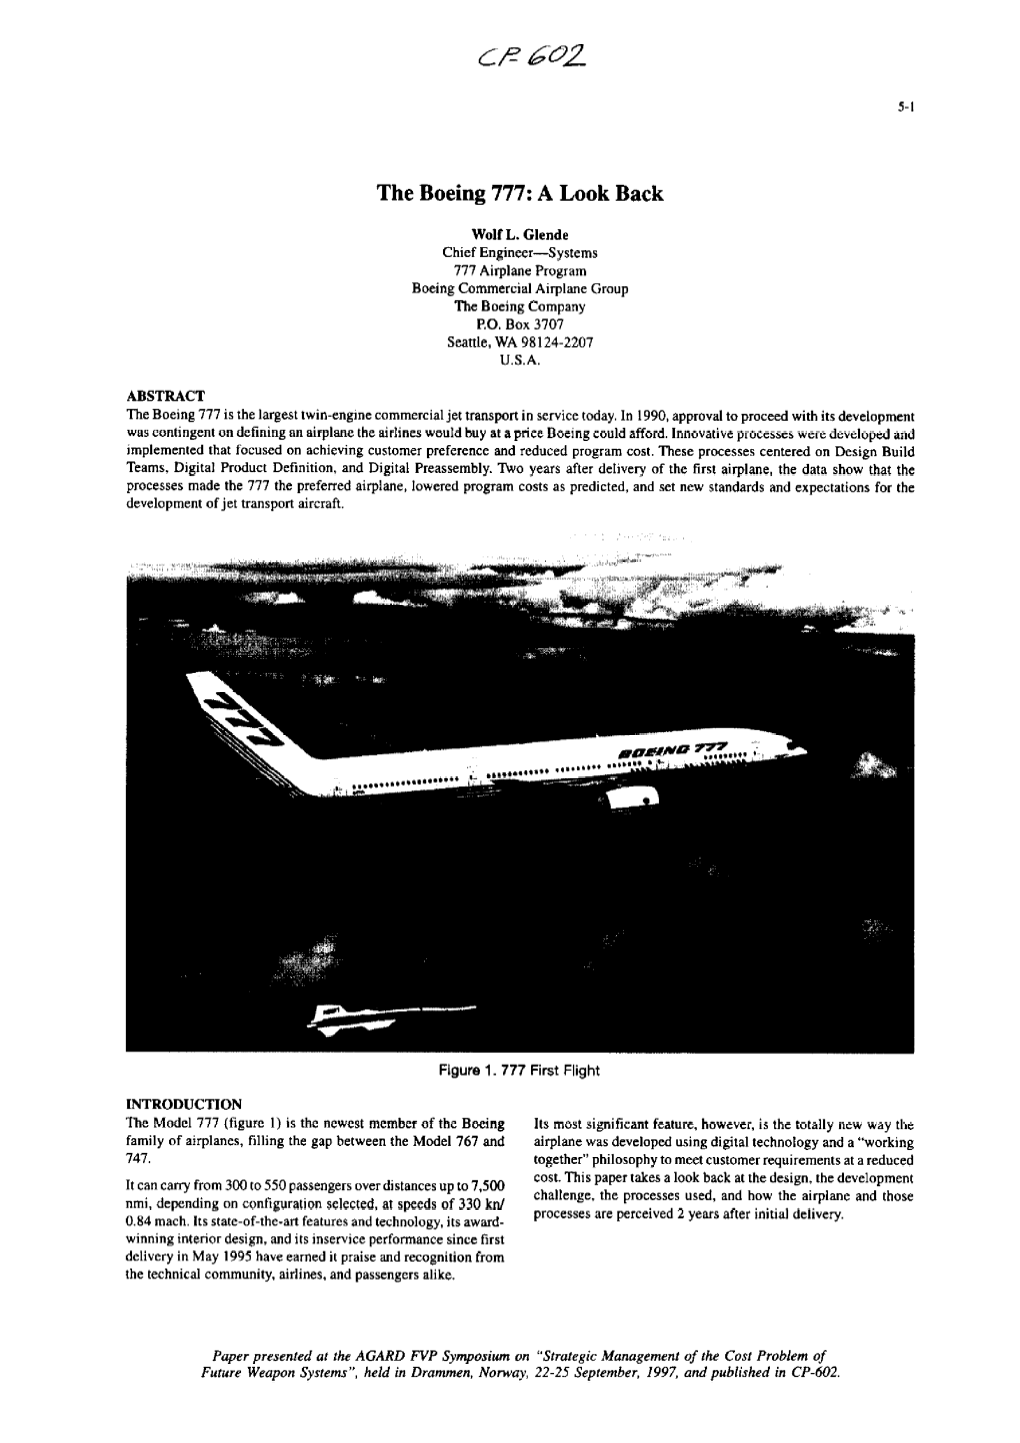 The Boeing 777: a Look Back